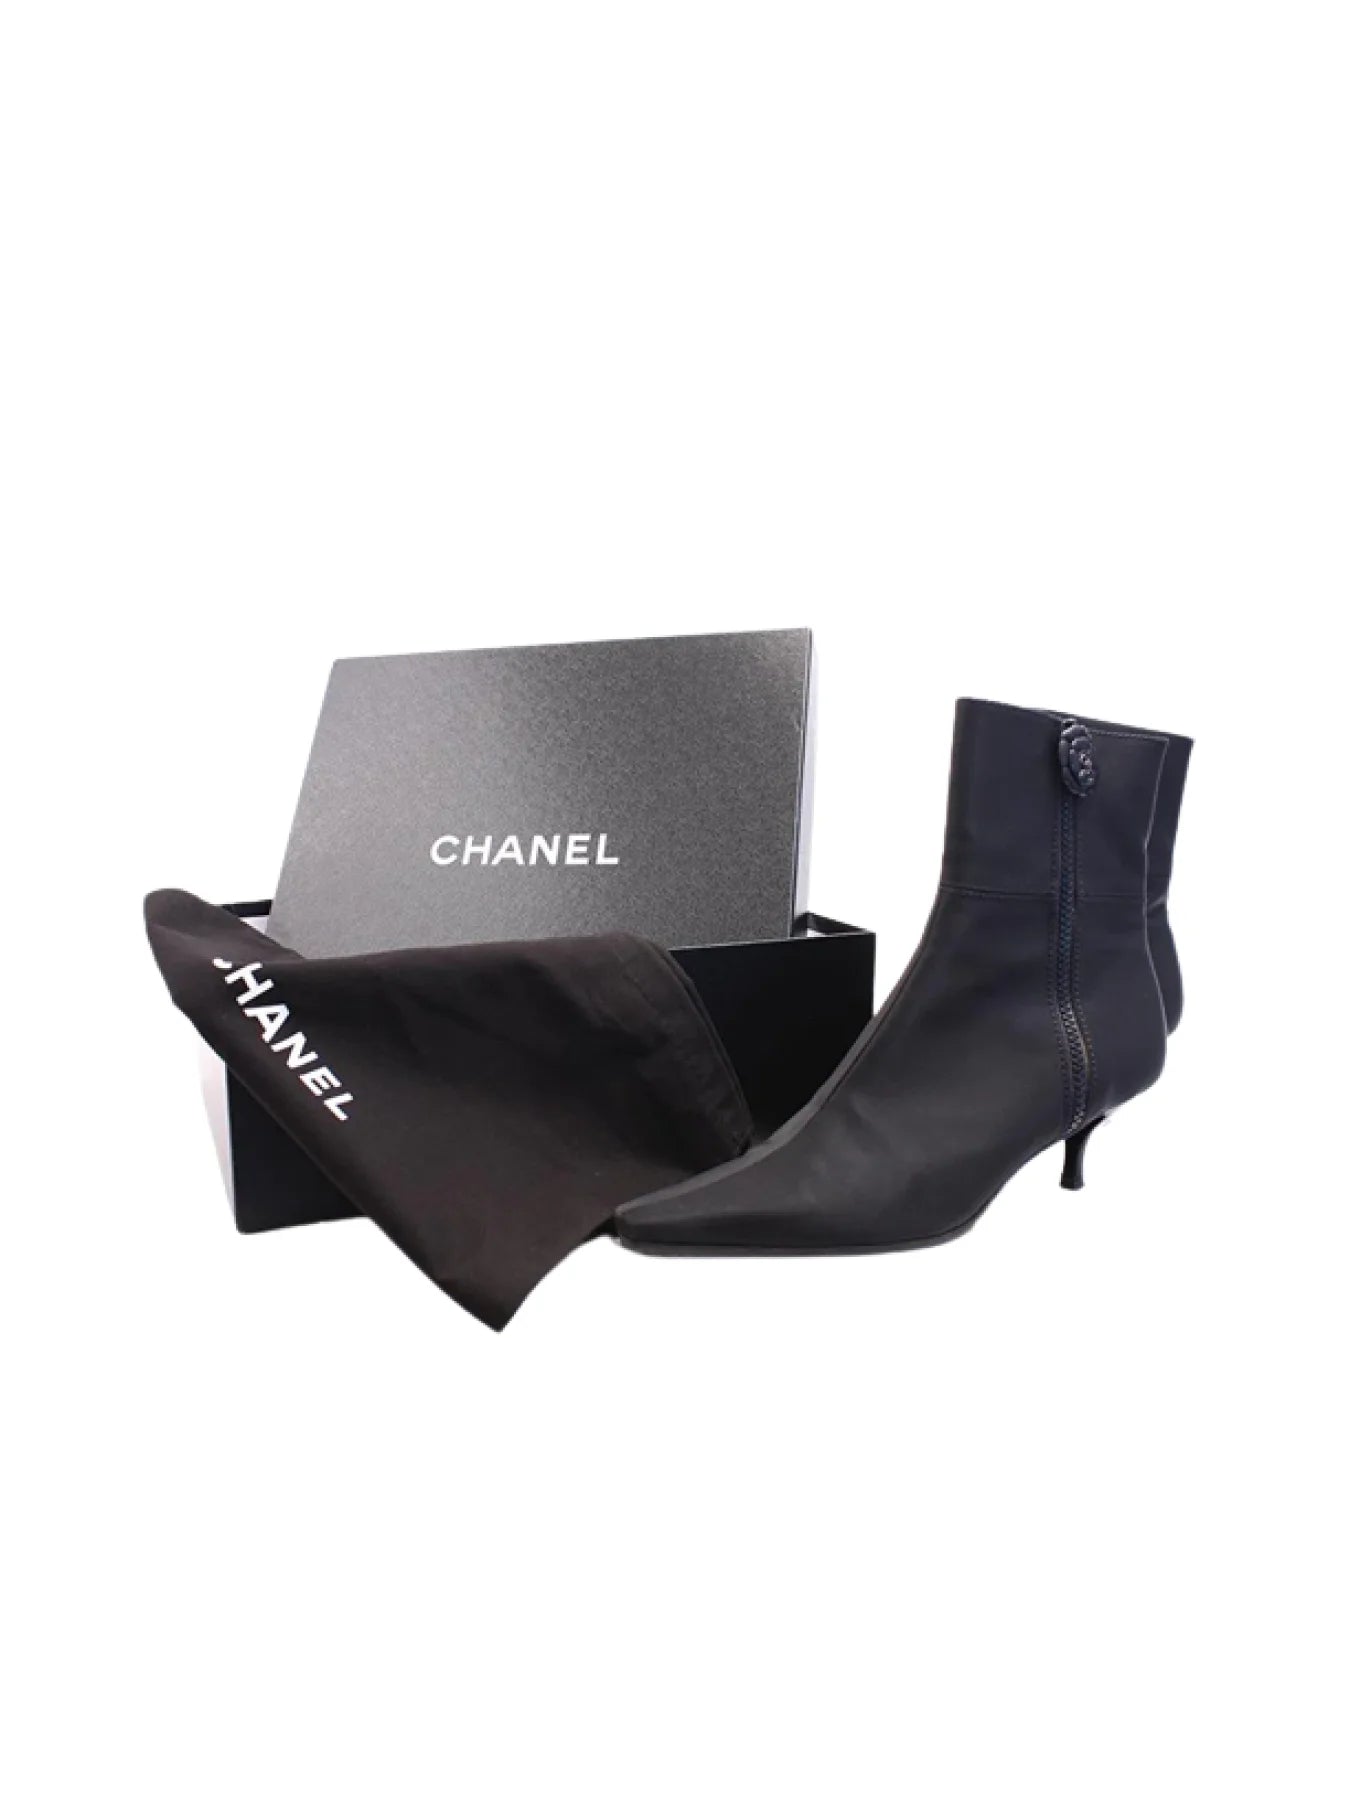 CHANEL Boots w/Camellia Flowers, 36